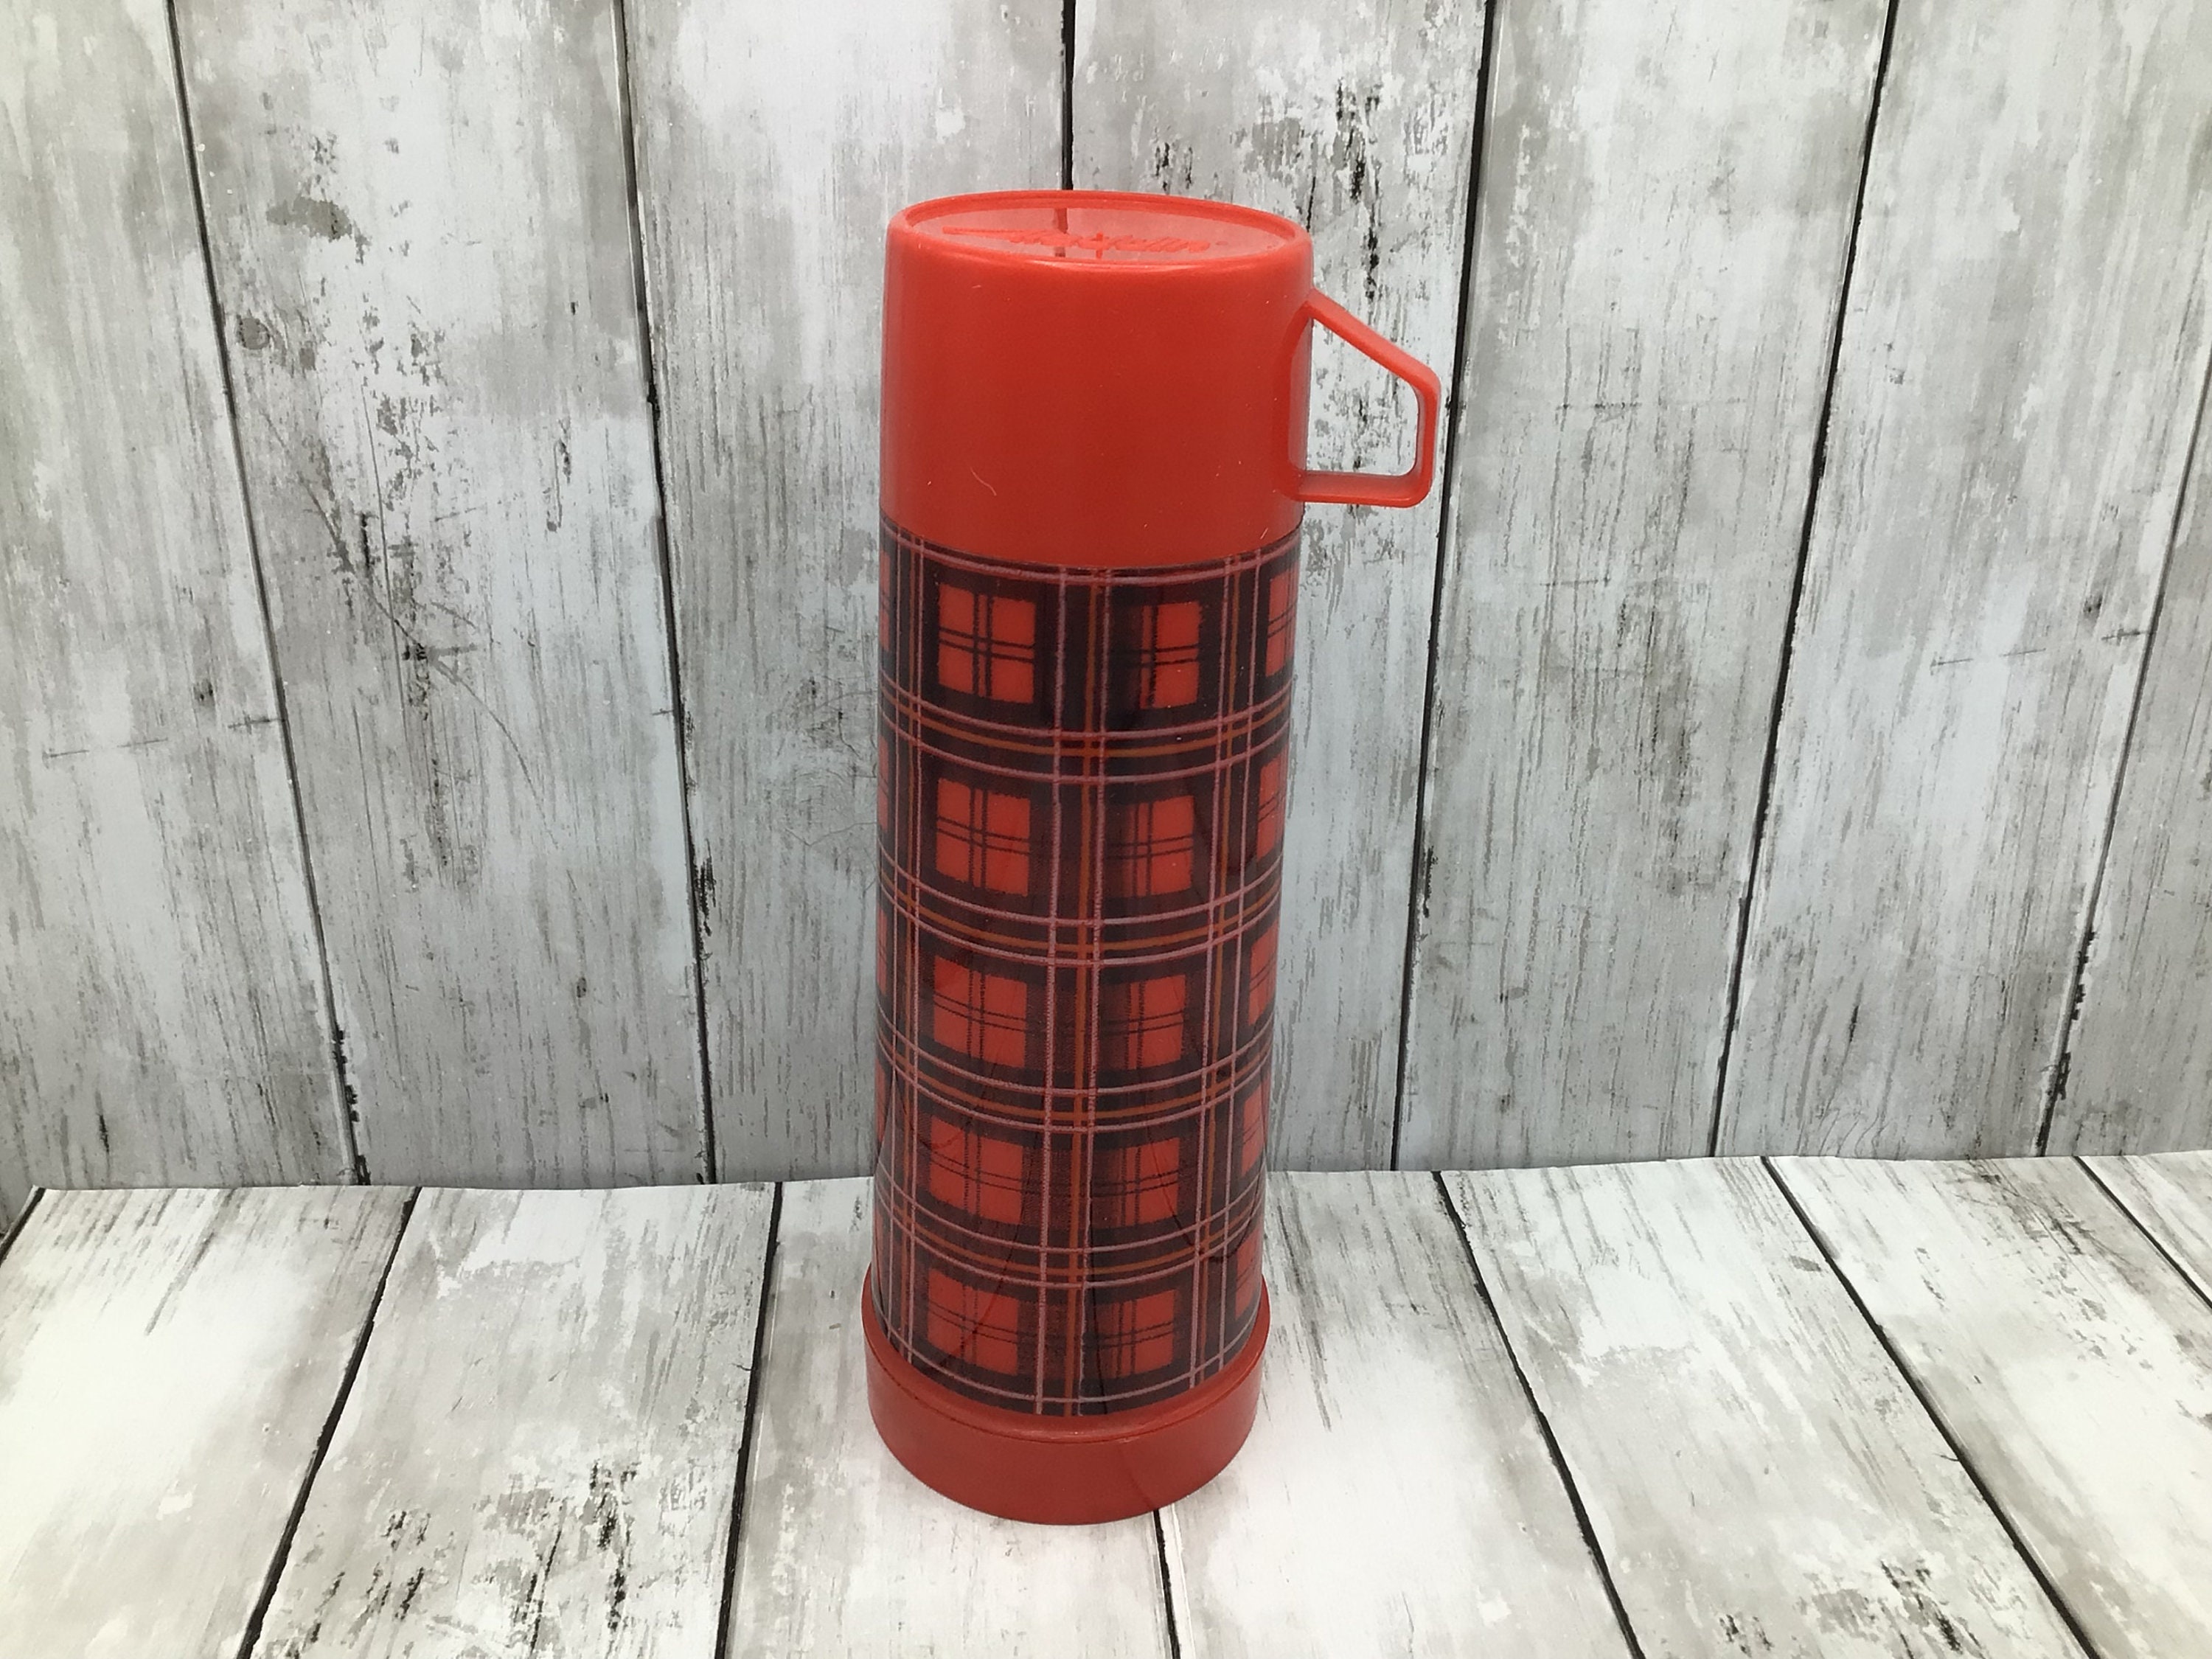 YOU PICK / Vintage Thermos / Vintage Red Plaid Thermos / Vintage